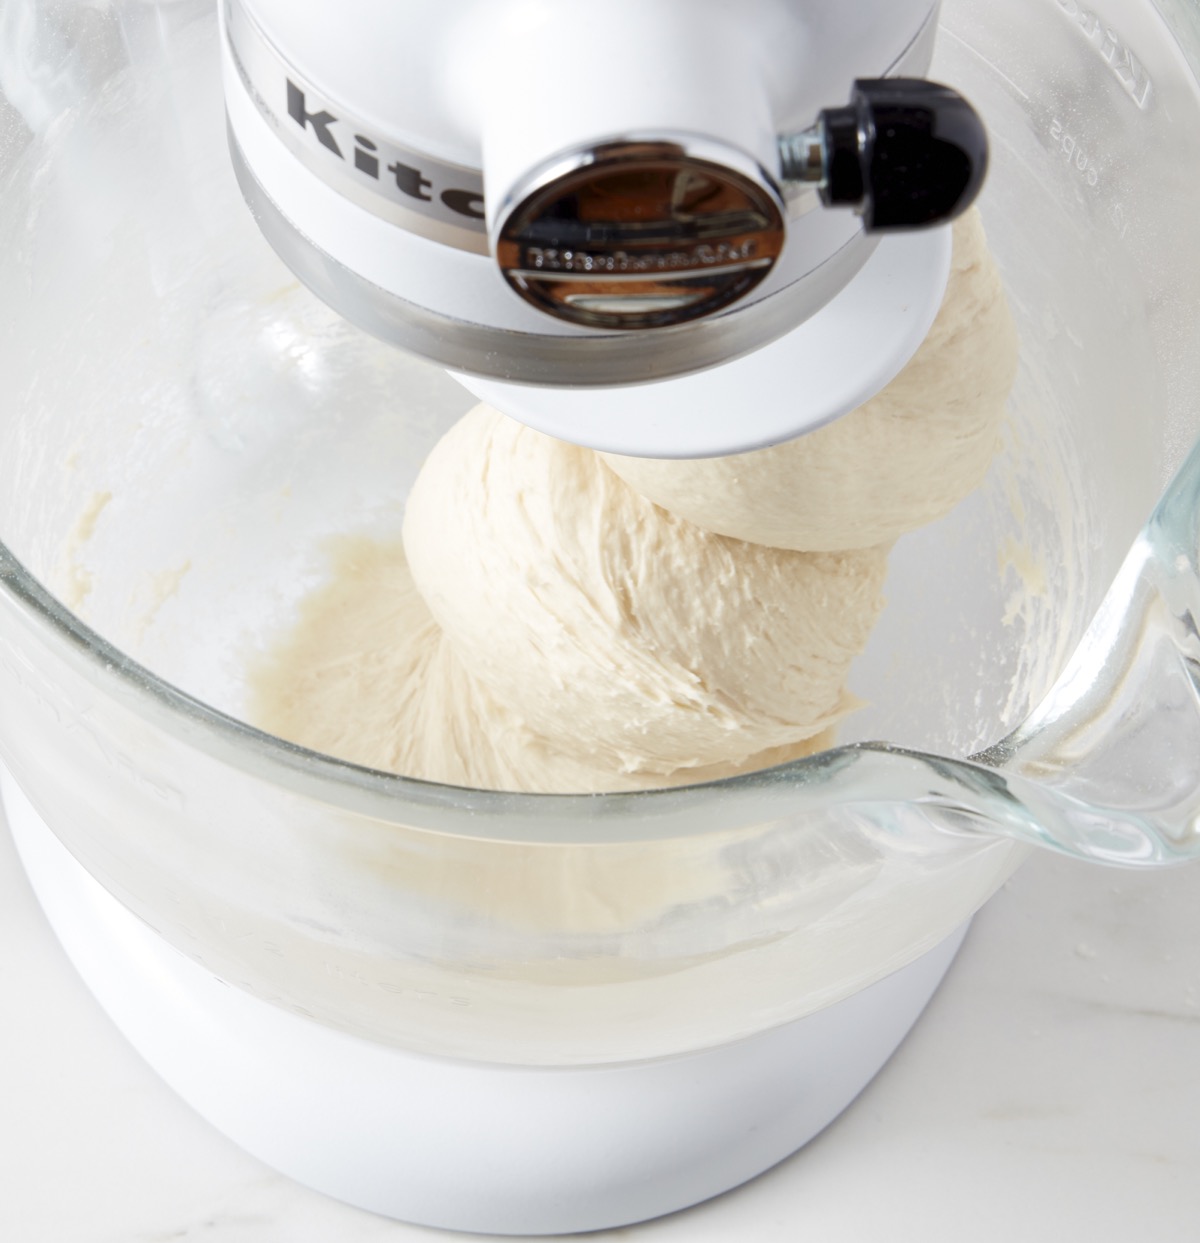 Cinnamon roll dough in the bowl of a stand mixer being kneaded, sticking to the bottom of the bowl.